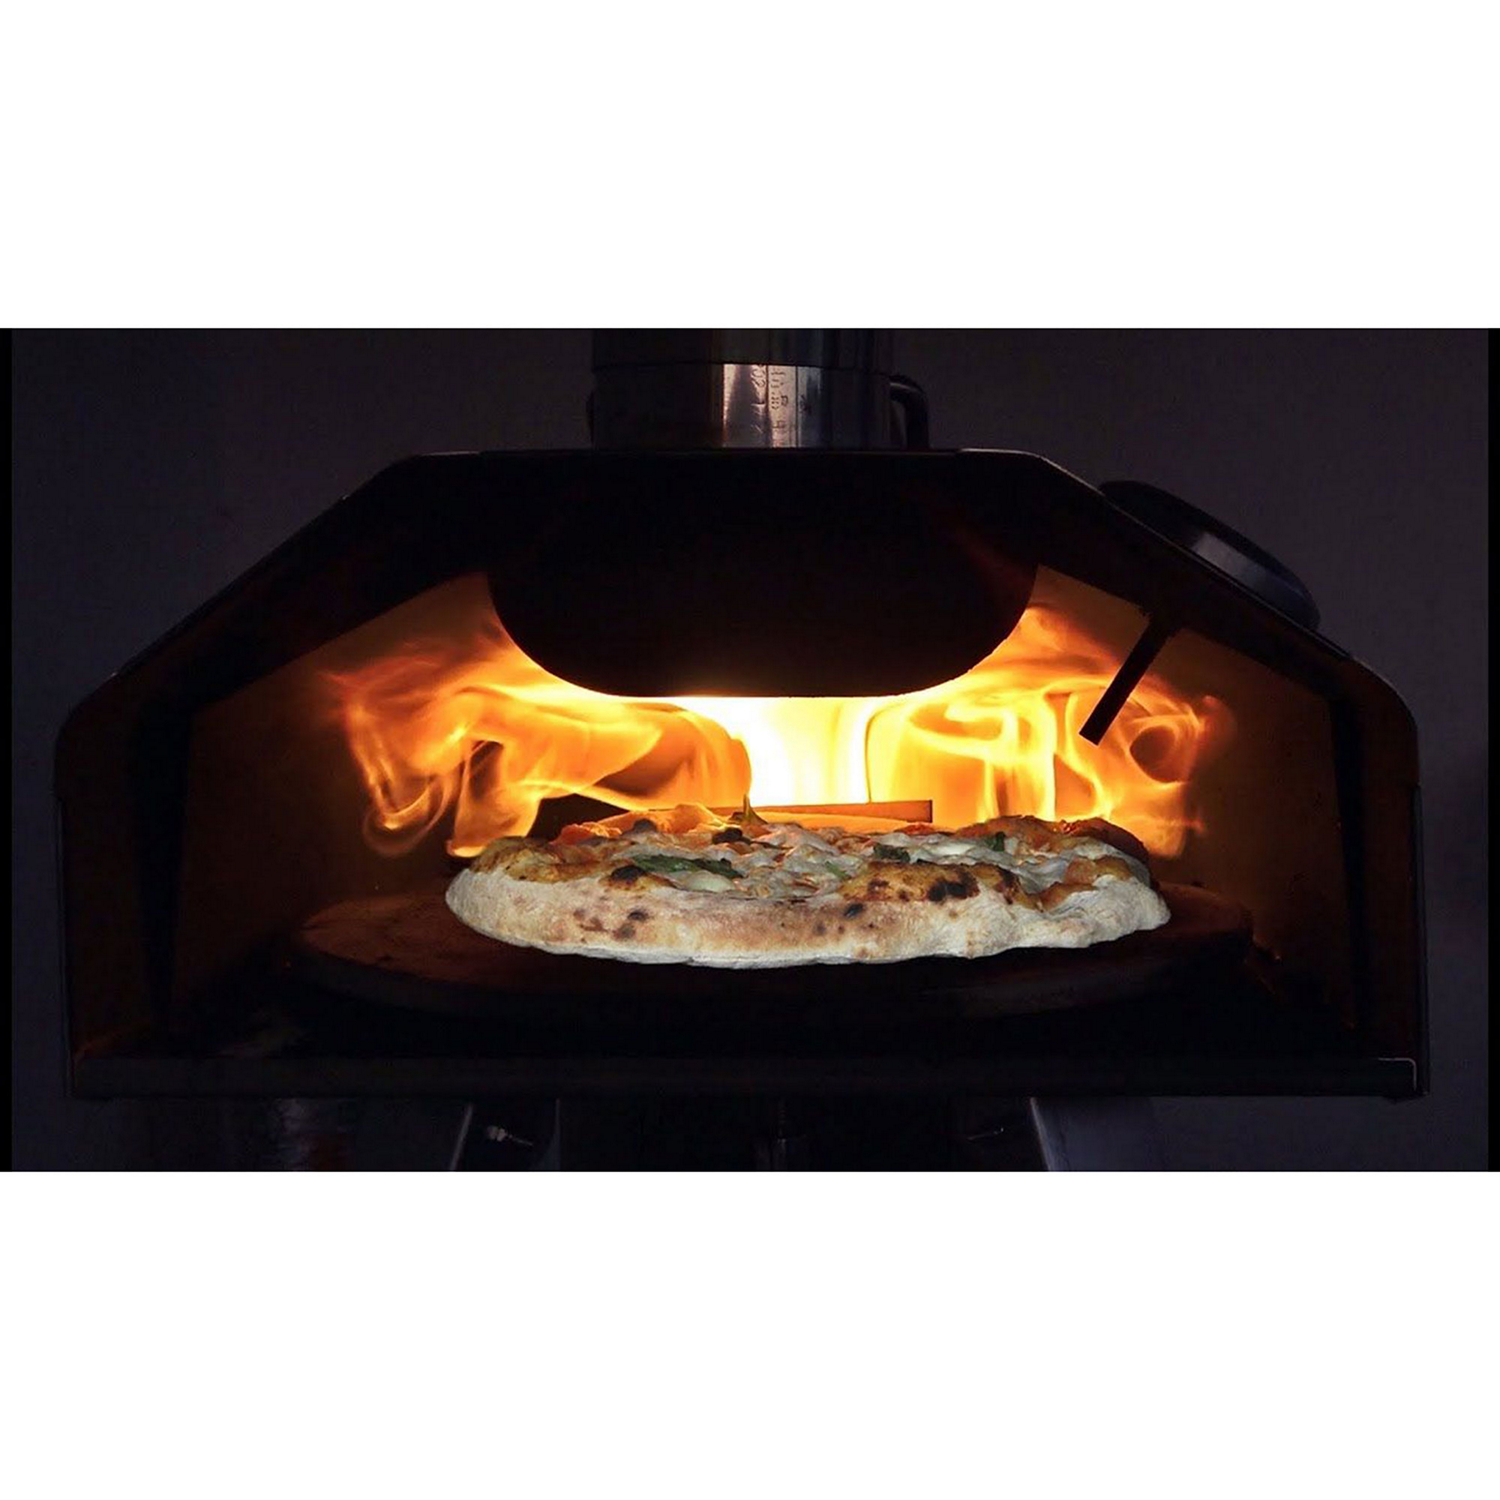 Rotating Pizza Oven And Stove In Oven